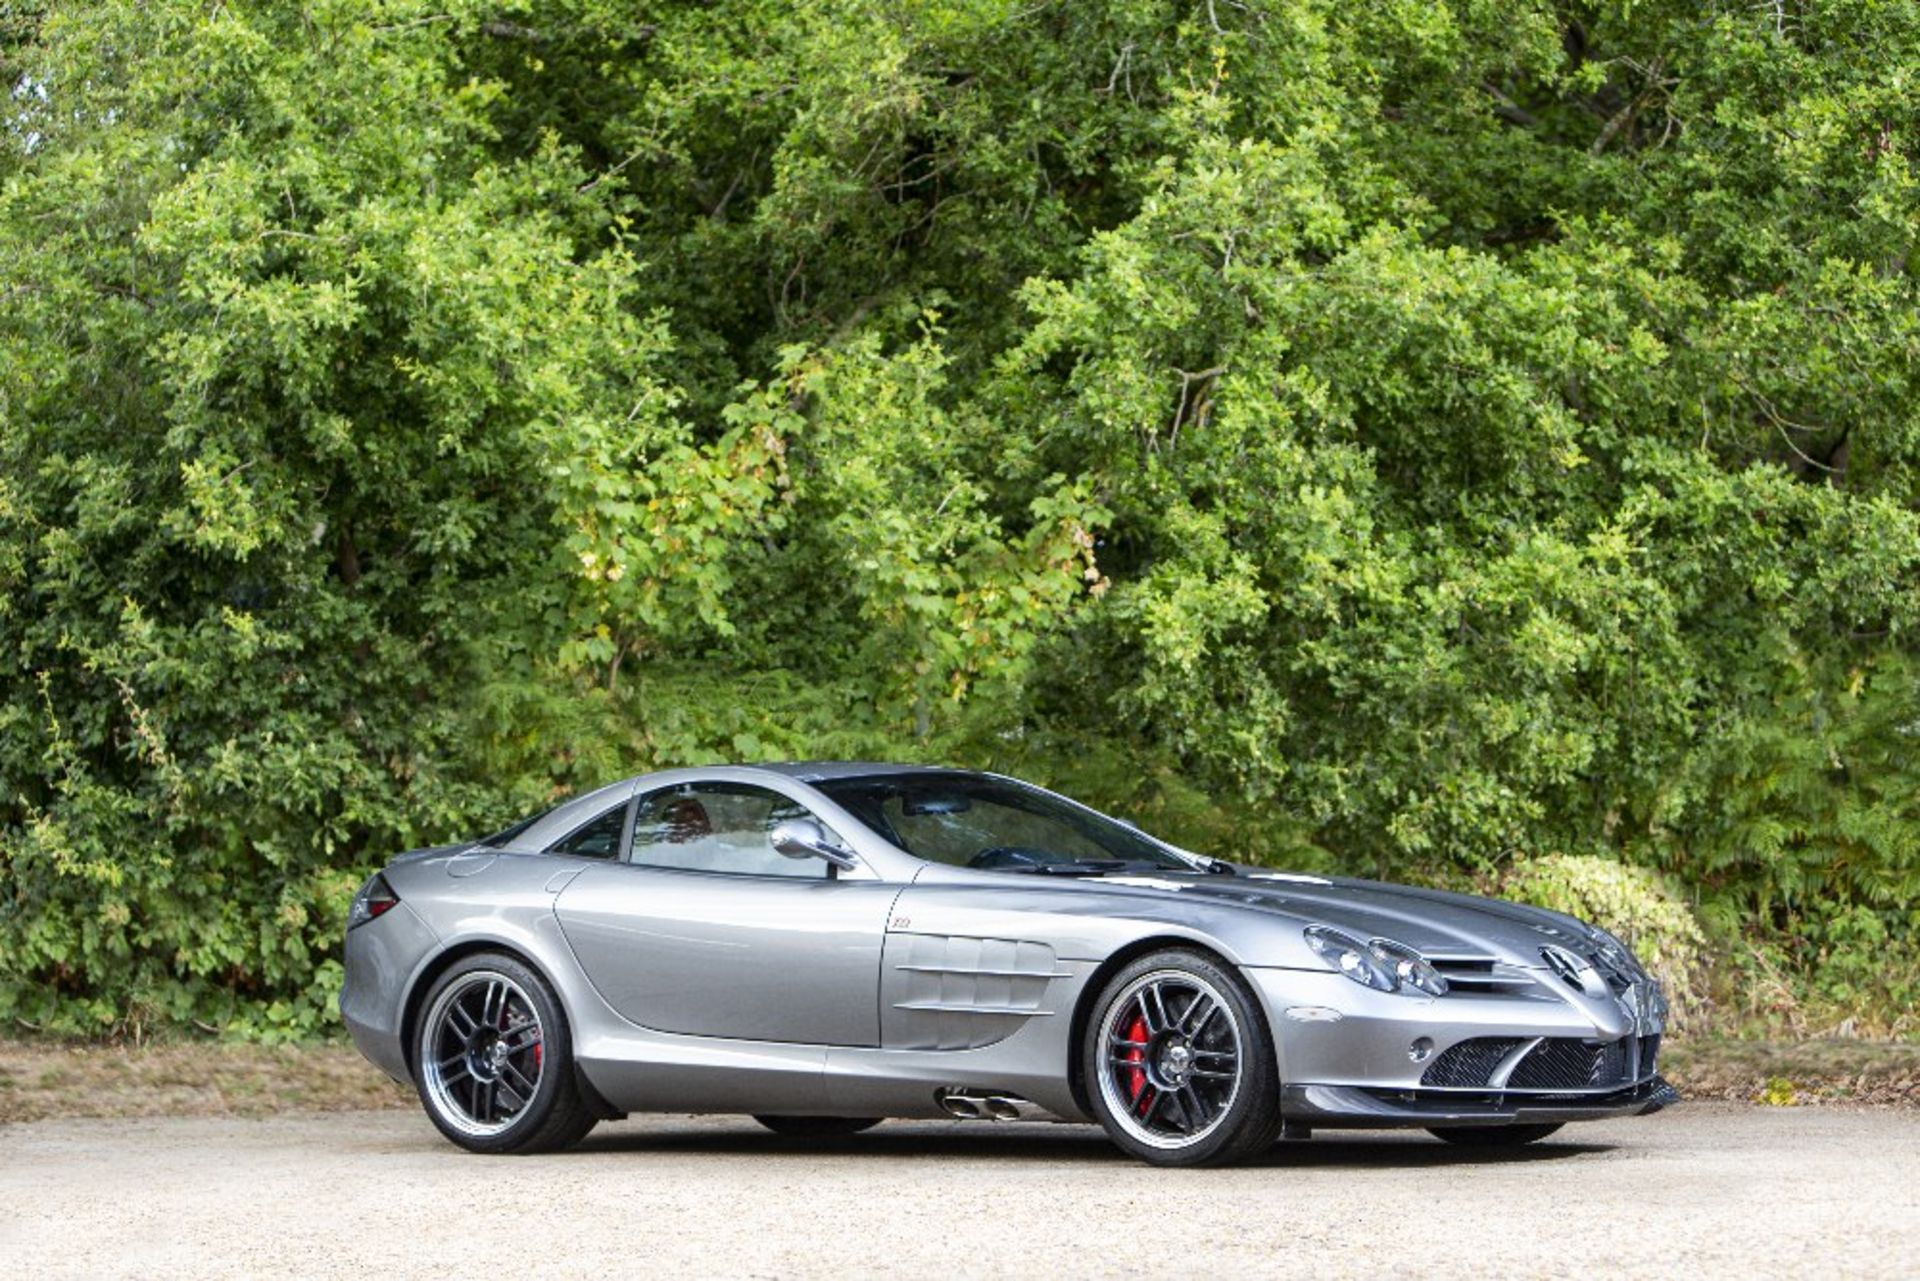 2007 Mercedes-Benz SLR McLaren 722 Edition Coup&#233; Chassis no. WDDAJ76F67M001264 Engine no. 1... - Image 26 of 26